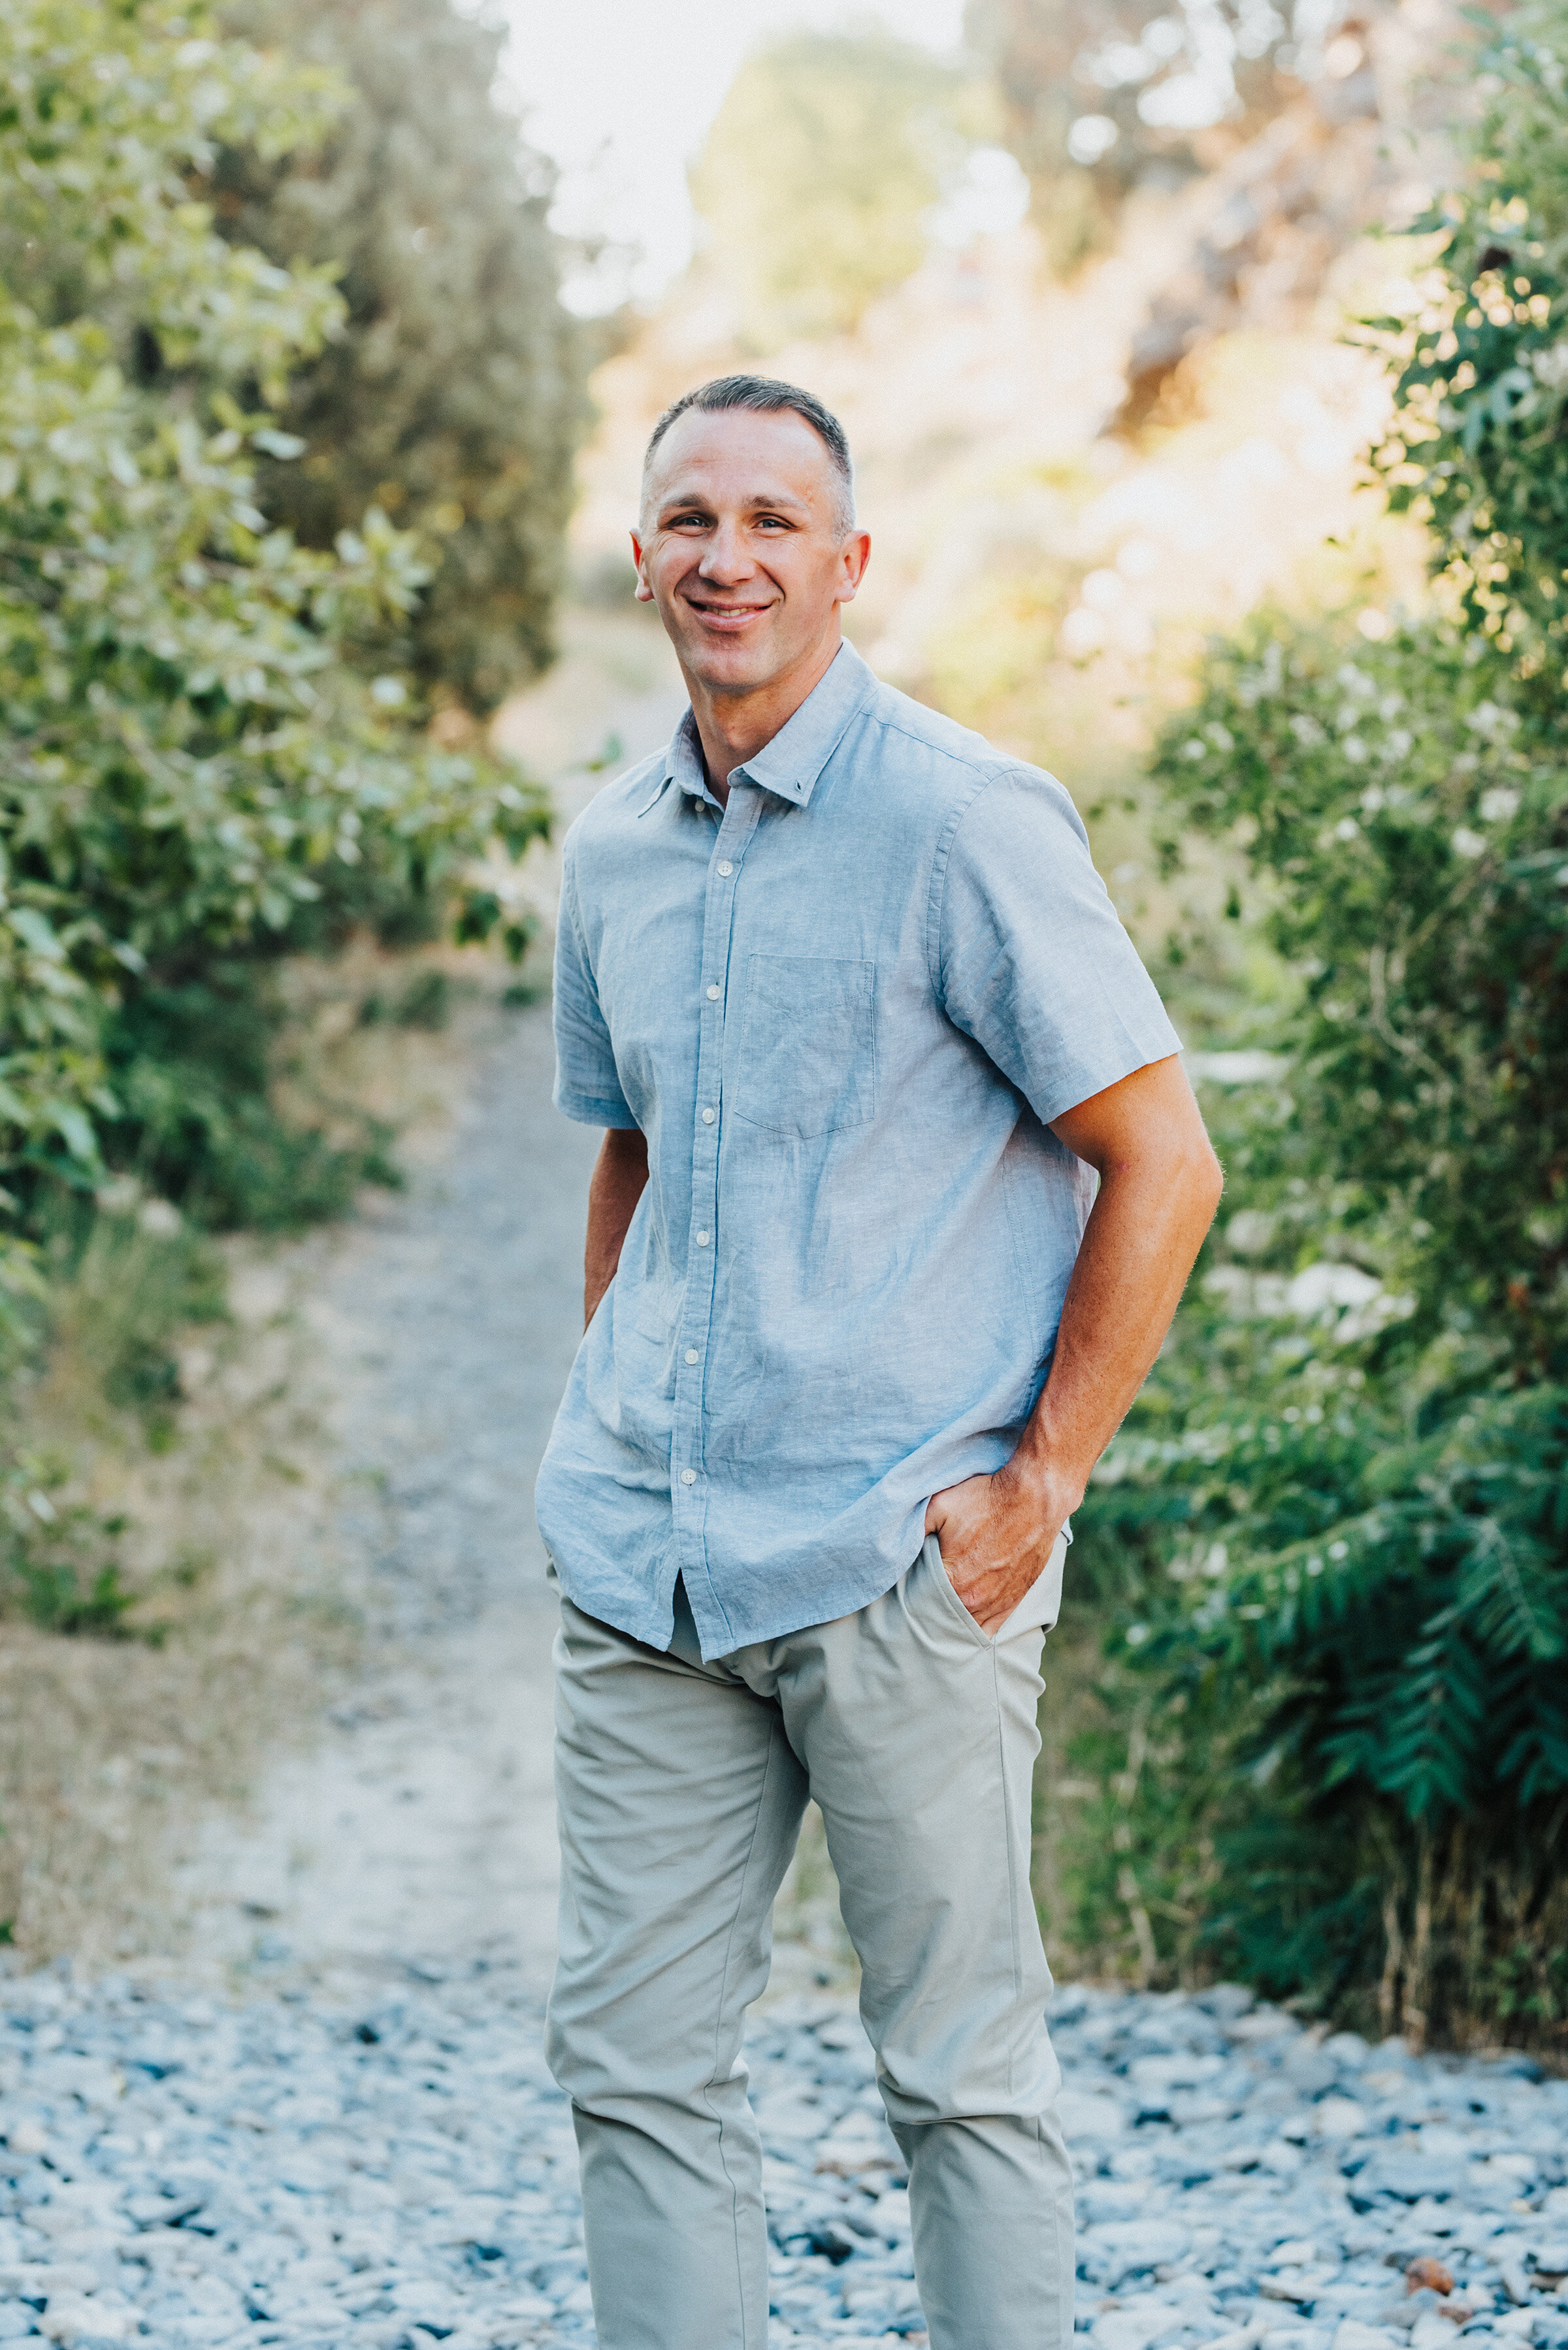  Handsome dad tucks his hands into his pockets and gives a subtle smile while on a stony path in the canyon. Light blue and khakis collected pose providence canyon utah standing alone #providencecanyon #utahphotography #utah #familyphoto #family #familyphotography #familyphotographer #photography #love #familytime #familyphotoshoot #familyportrait #familyfirst #photooftheday #familyphotos #photographer #familylove #photoshoot #familyportraits 